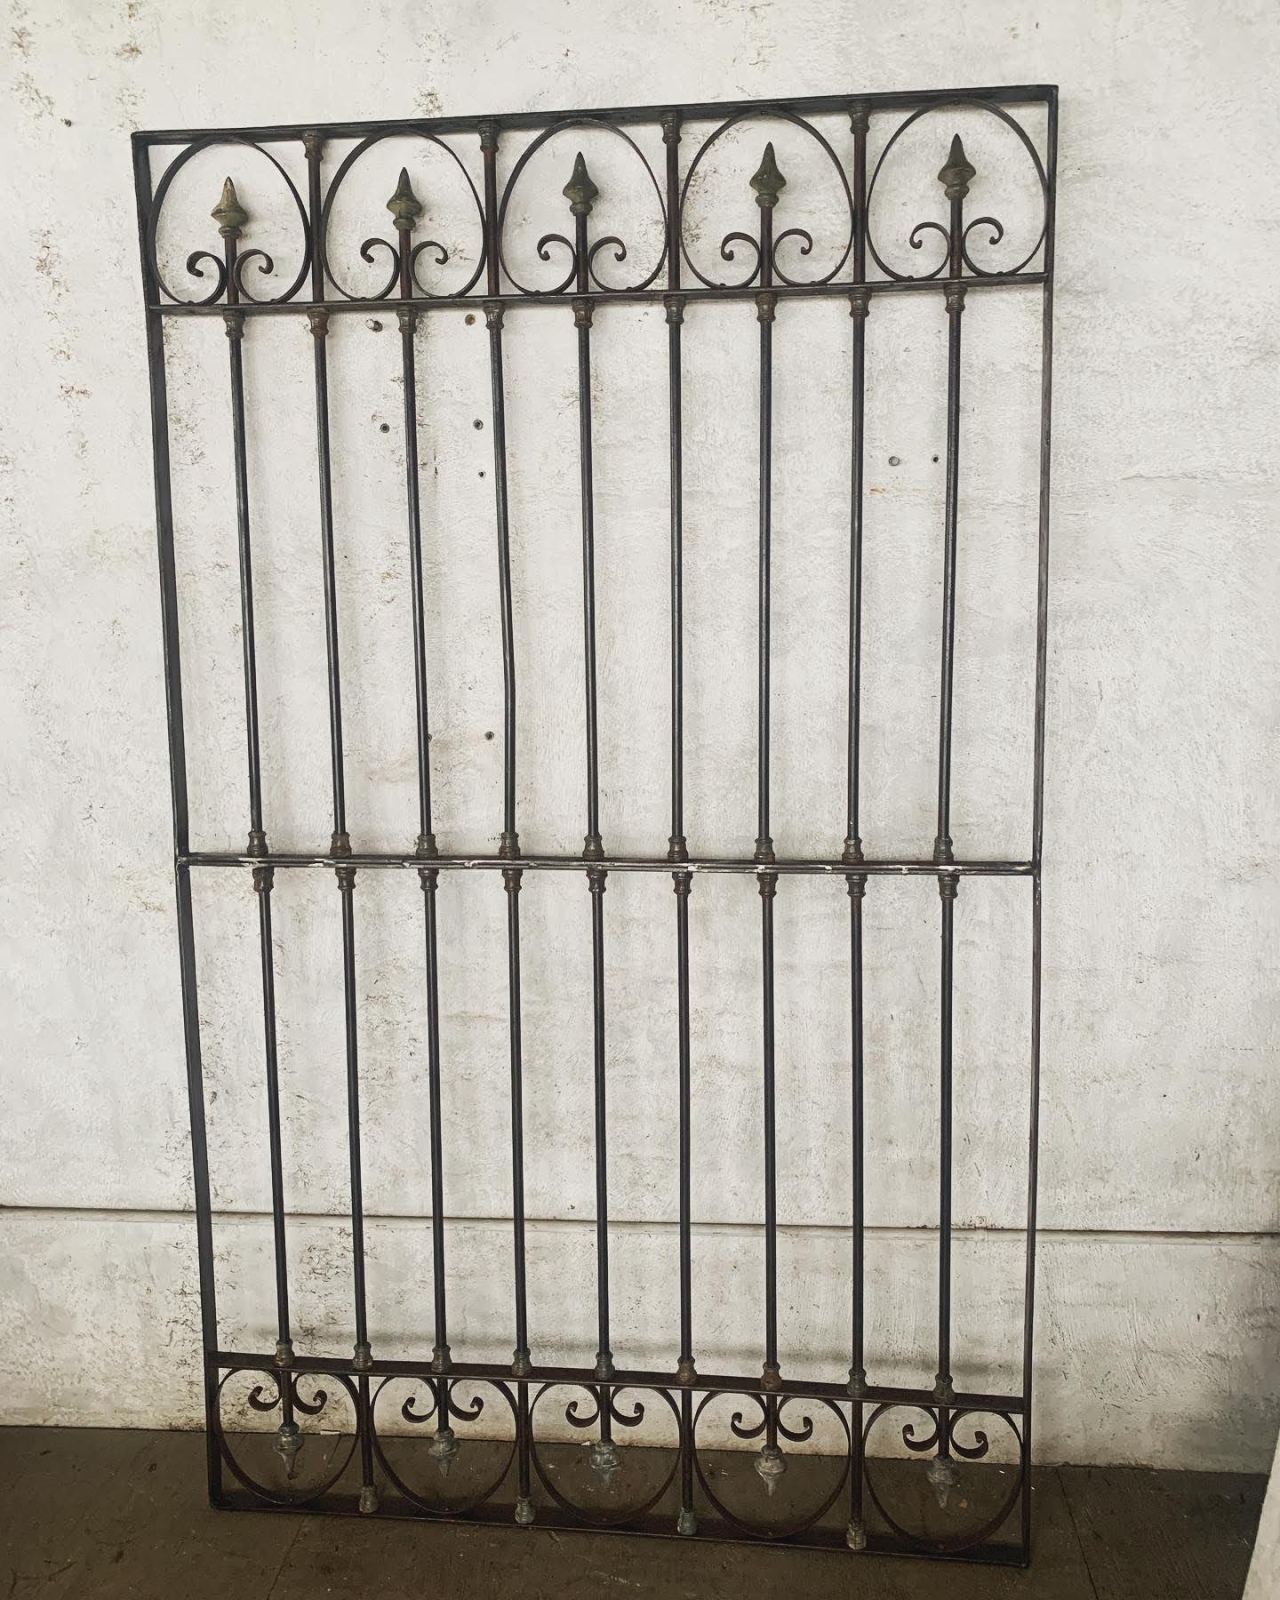 WROUGHT IRON PANELA fantastic late 19th century wrought iron panel with matching scrolled decoration on top and bottom. A great piece both for interior or exterior decor.Item No. 1645Dimension: 7ft tall x 51″ wideList Price: $ 950504.581.3733 / tinfo@labellenouvelle.com / e #antiques#architectural antiques#wrought iron#garden antiques#window guard#iron panel#garden decor#interior decor#nola#magazine street